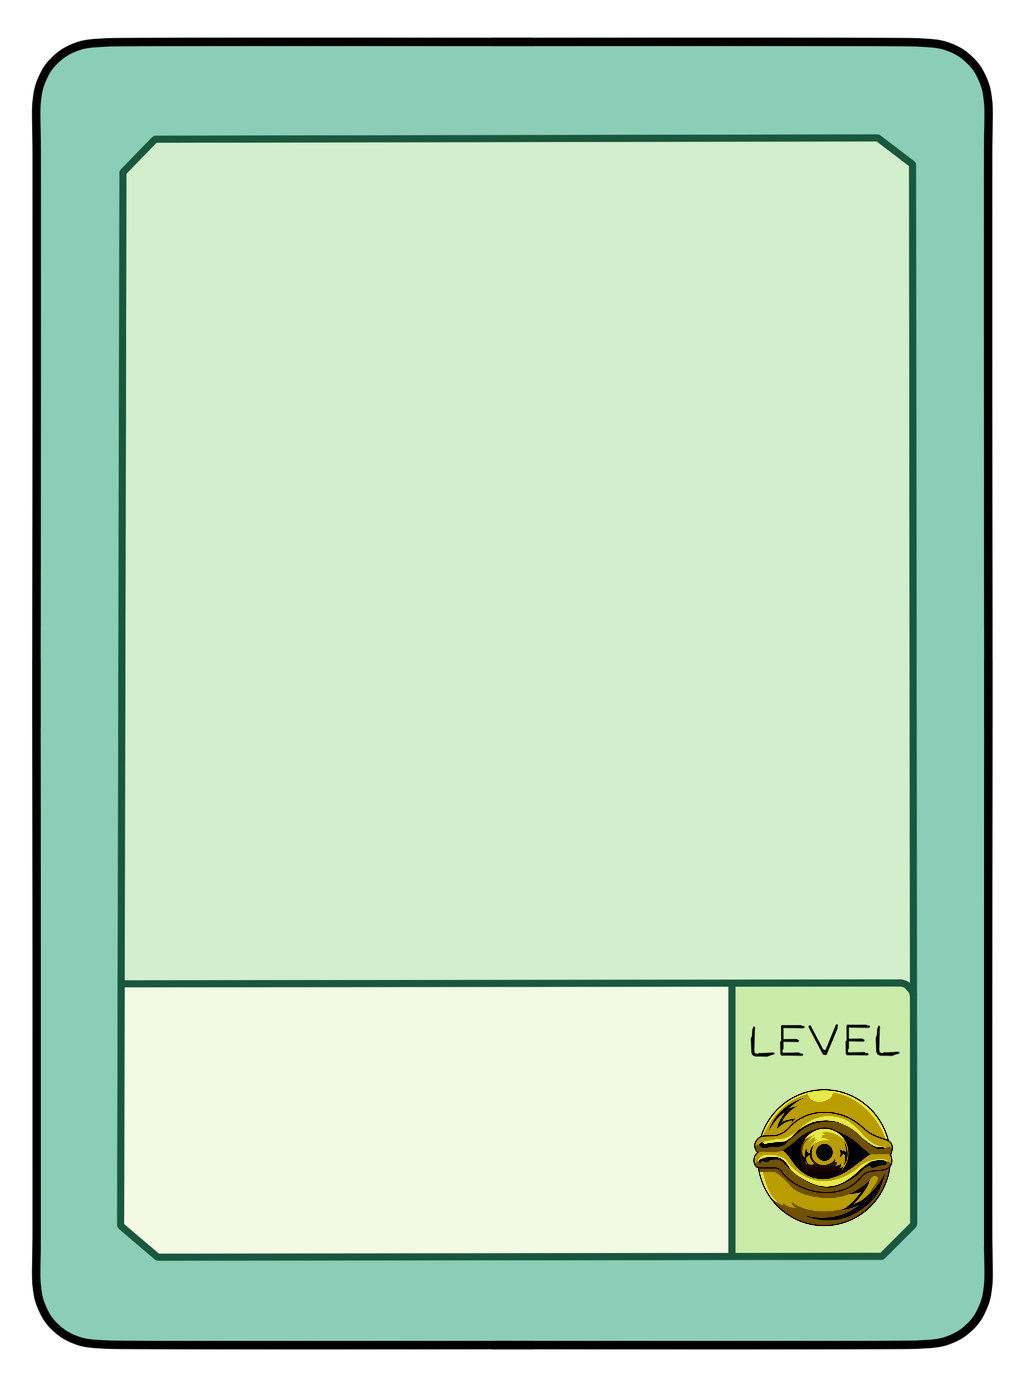 High Quality OC Character pow card level yugioh monsters Blank Meme Template